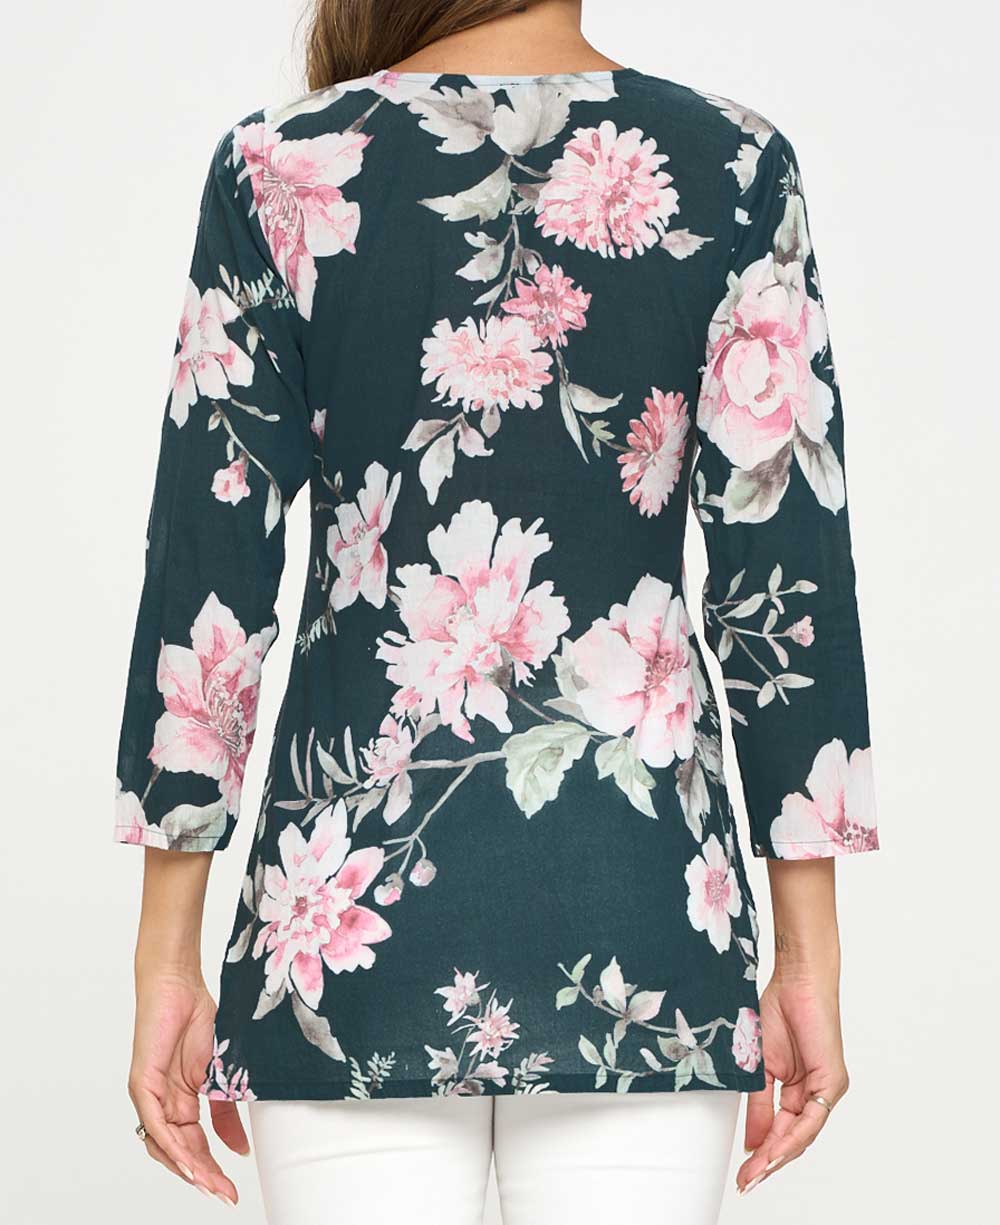 Floral Cotton Tunic Top - Apparel S